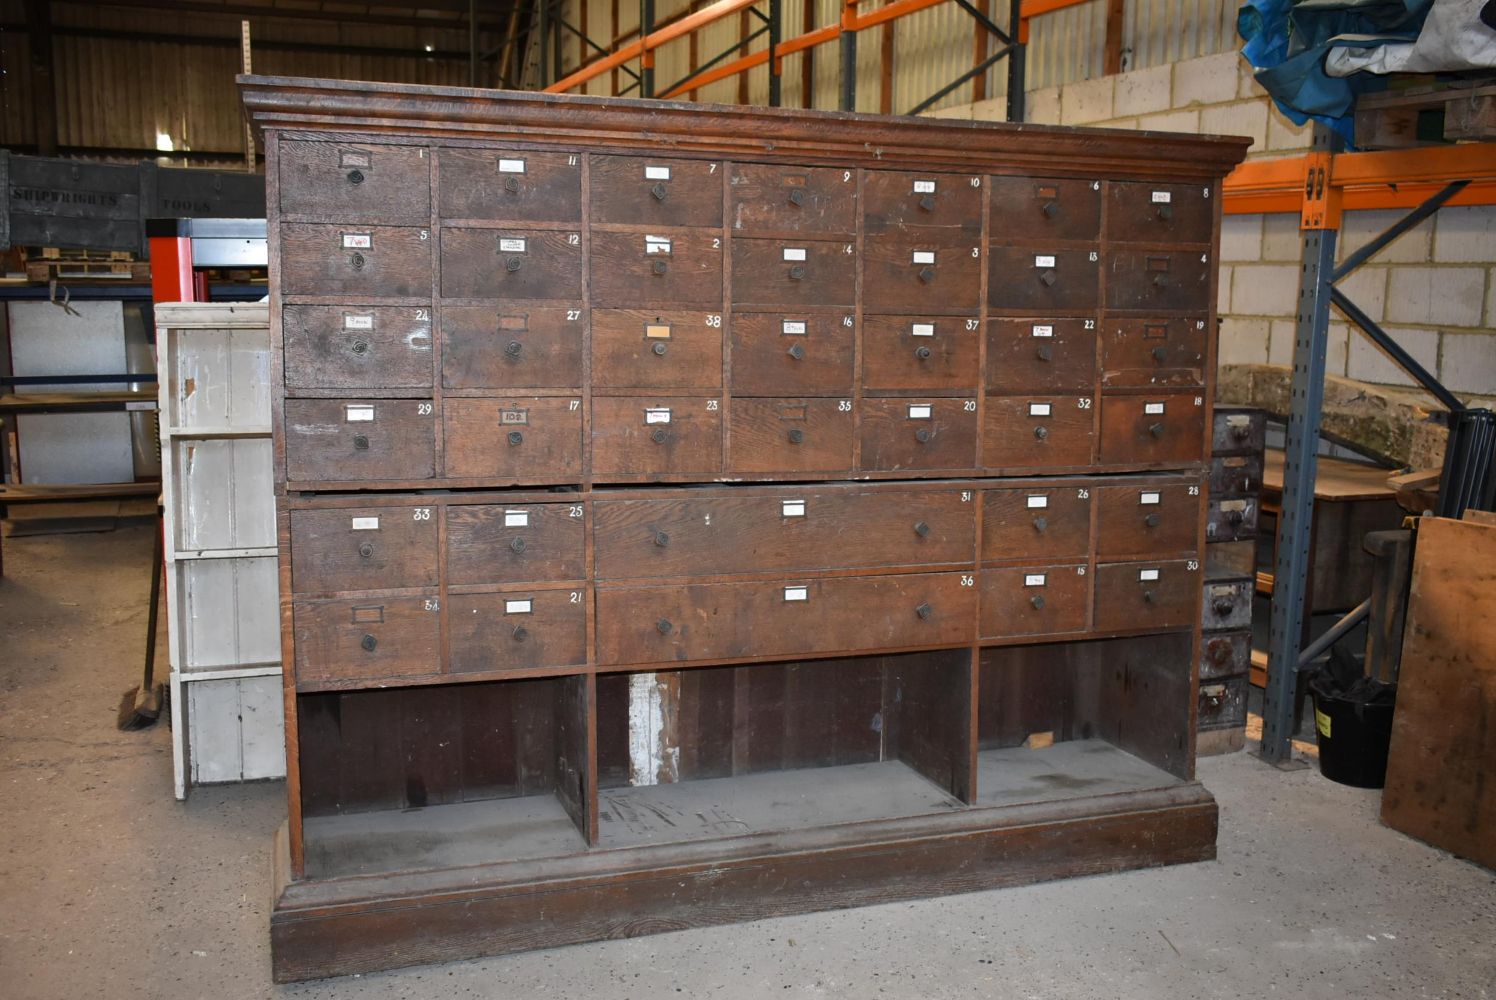 Dispersal Sale of the Extensive Fixtures, Fittings and Furniture for G&M Tools and 450 lots of Antique and Modern Woodworking Tools